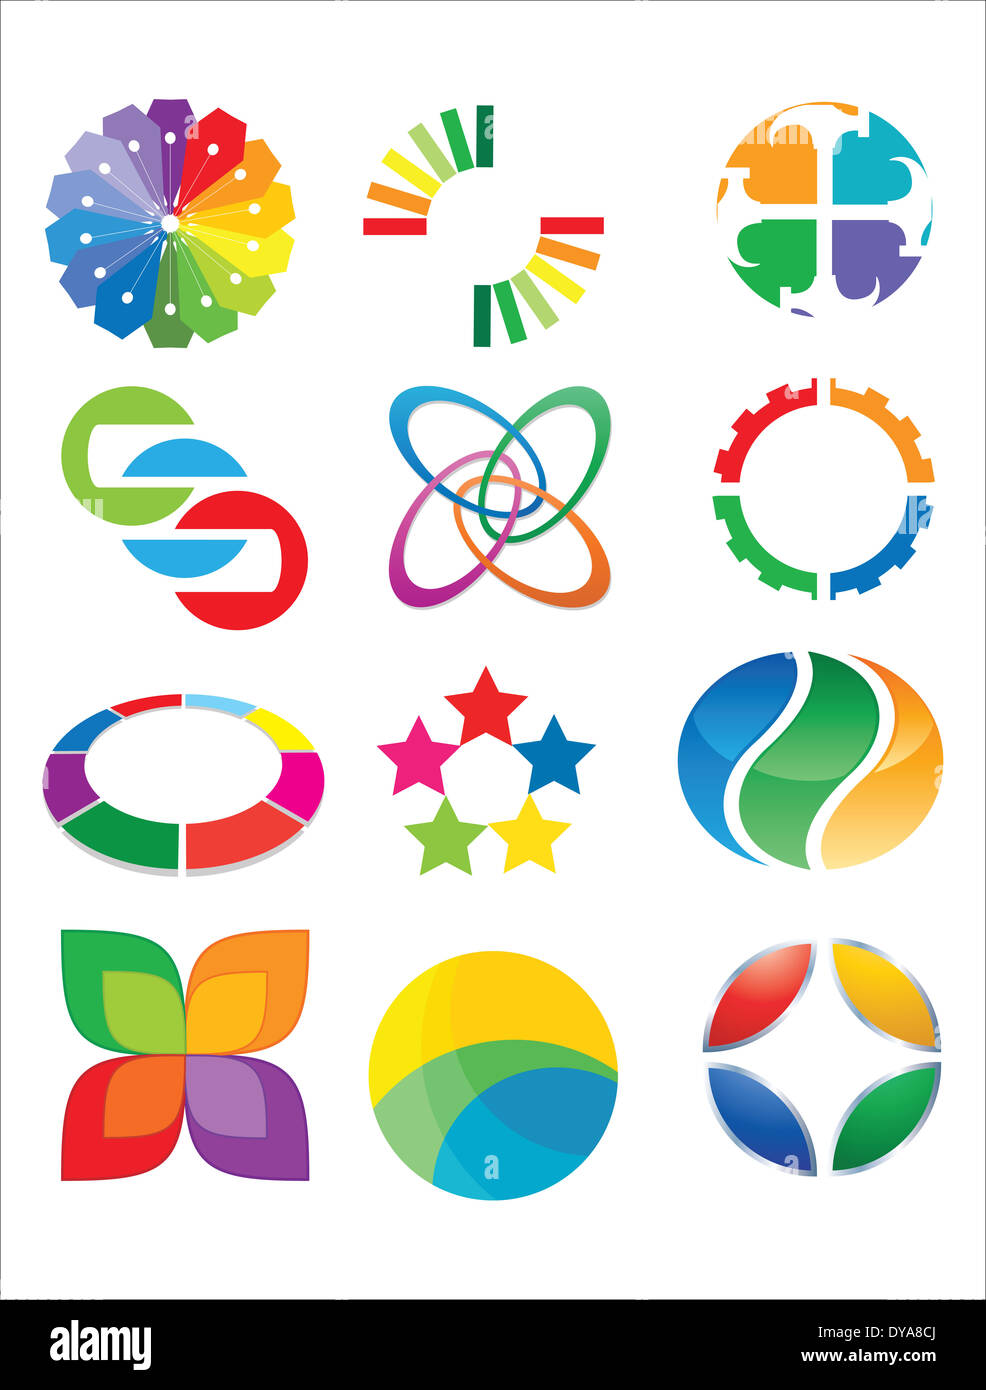 This is a set of colorful vector logo & design elements. Full editable Stock Photo